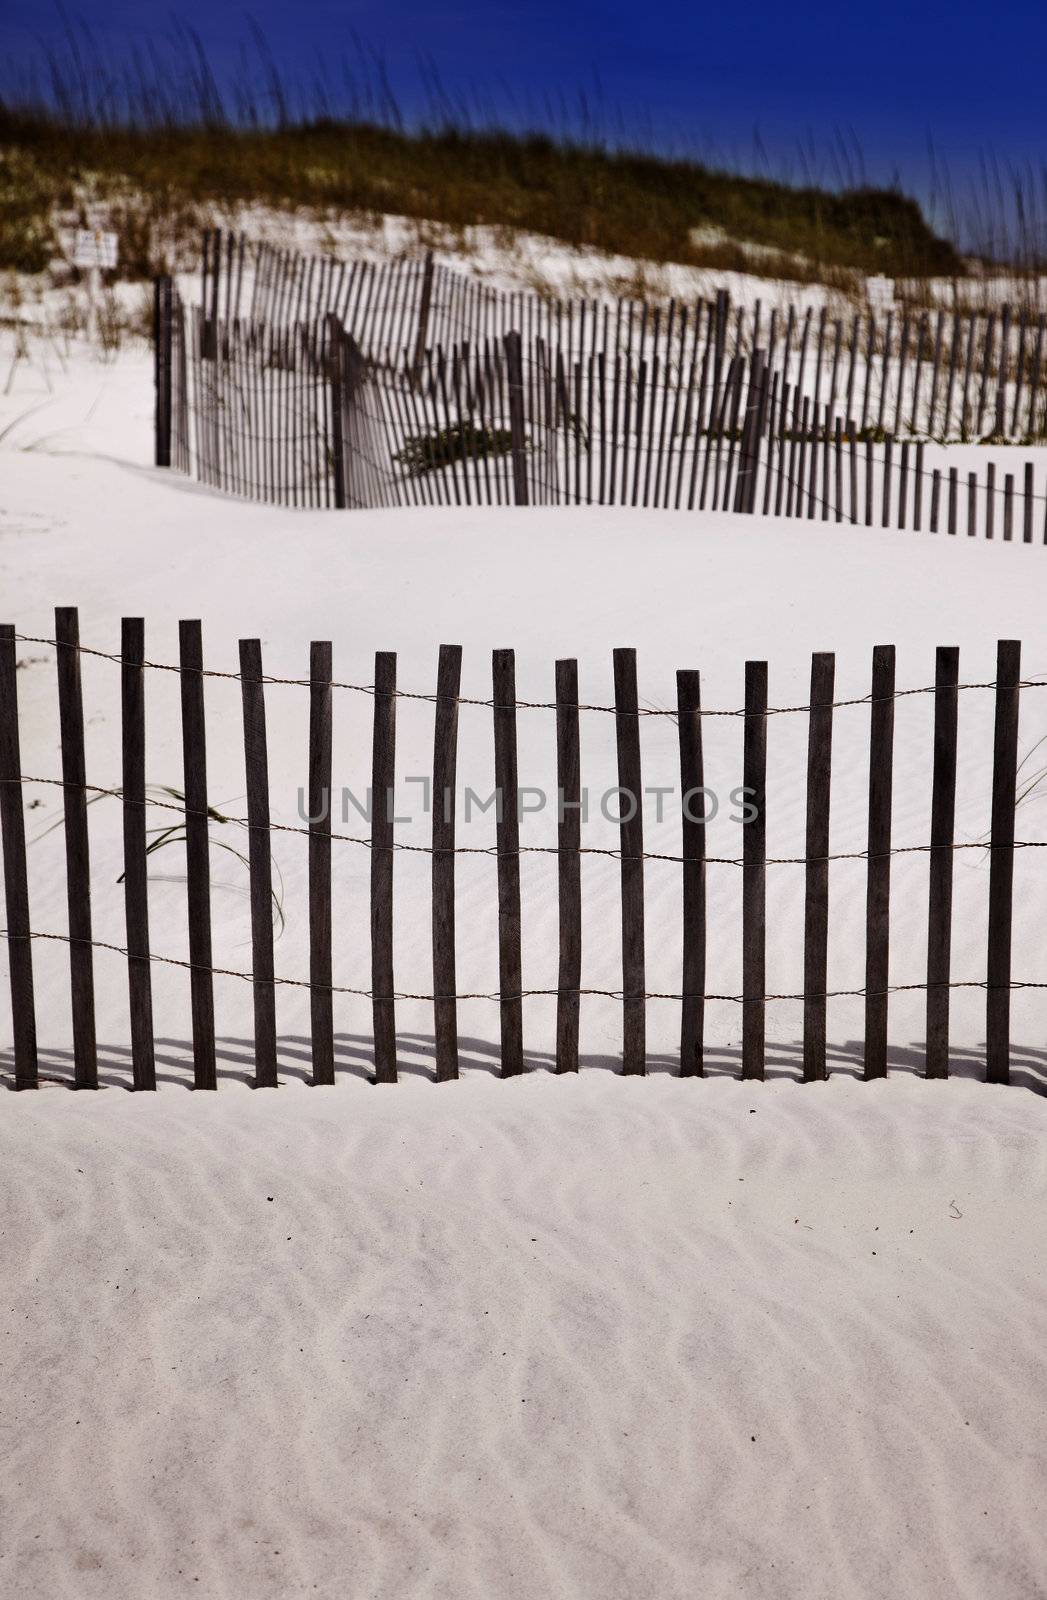 White Sand Dunes and Fence at the Beach.